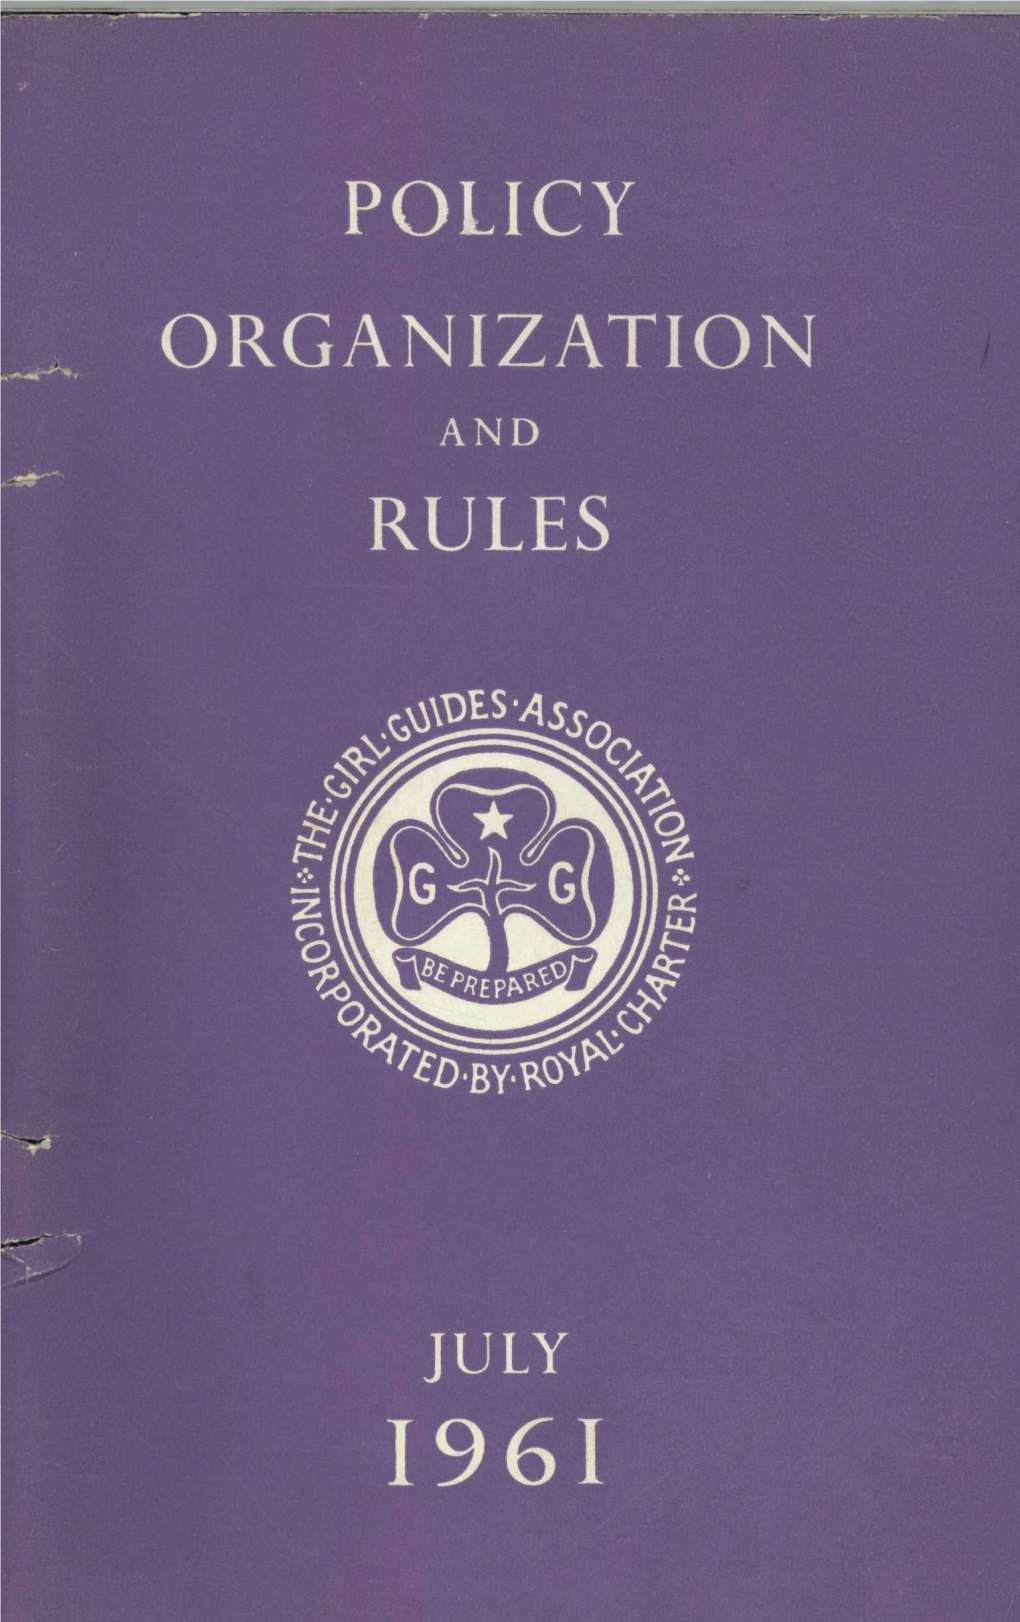 THE POLICY, ORGANIZATION, and RULES of the GIRL GUIDES ASSOCIATION (Incorporated by Royal Charter)